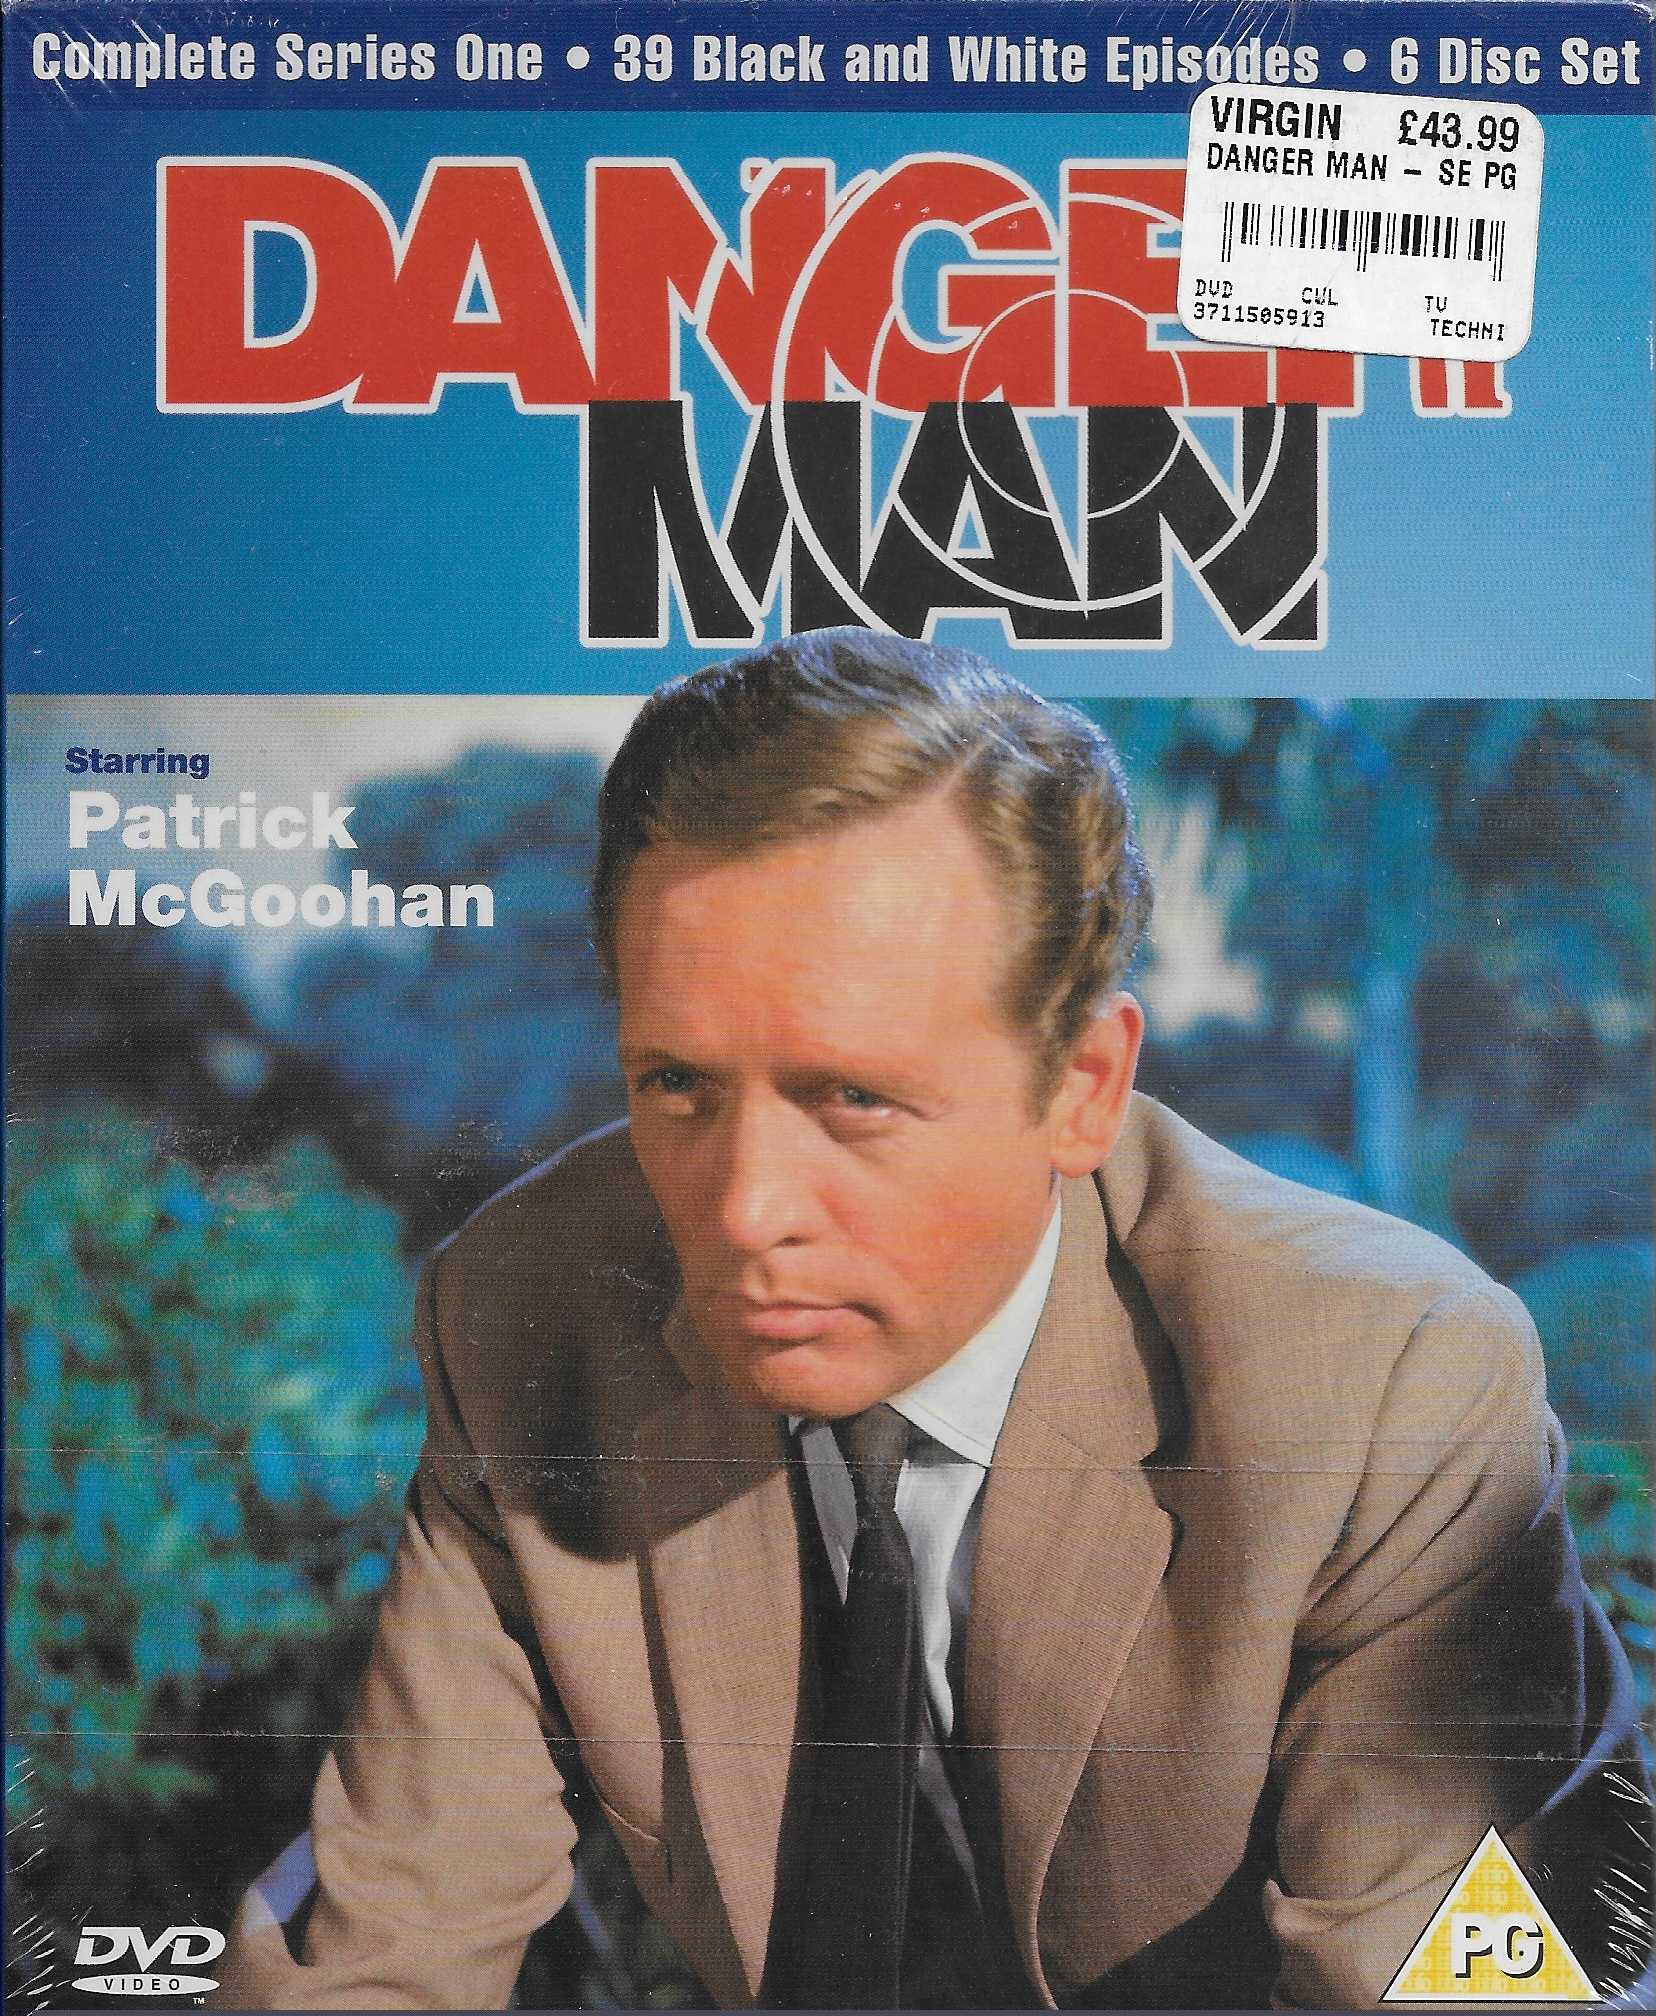 Picture of 37115 05913 Dangerman - Complete series 1 by artist Various from ITV, Channel 4 and Channel 5 library